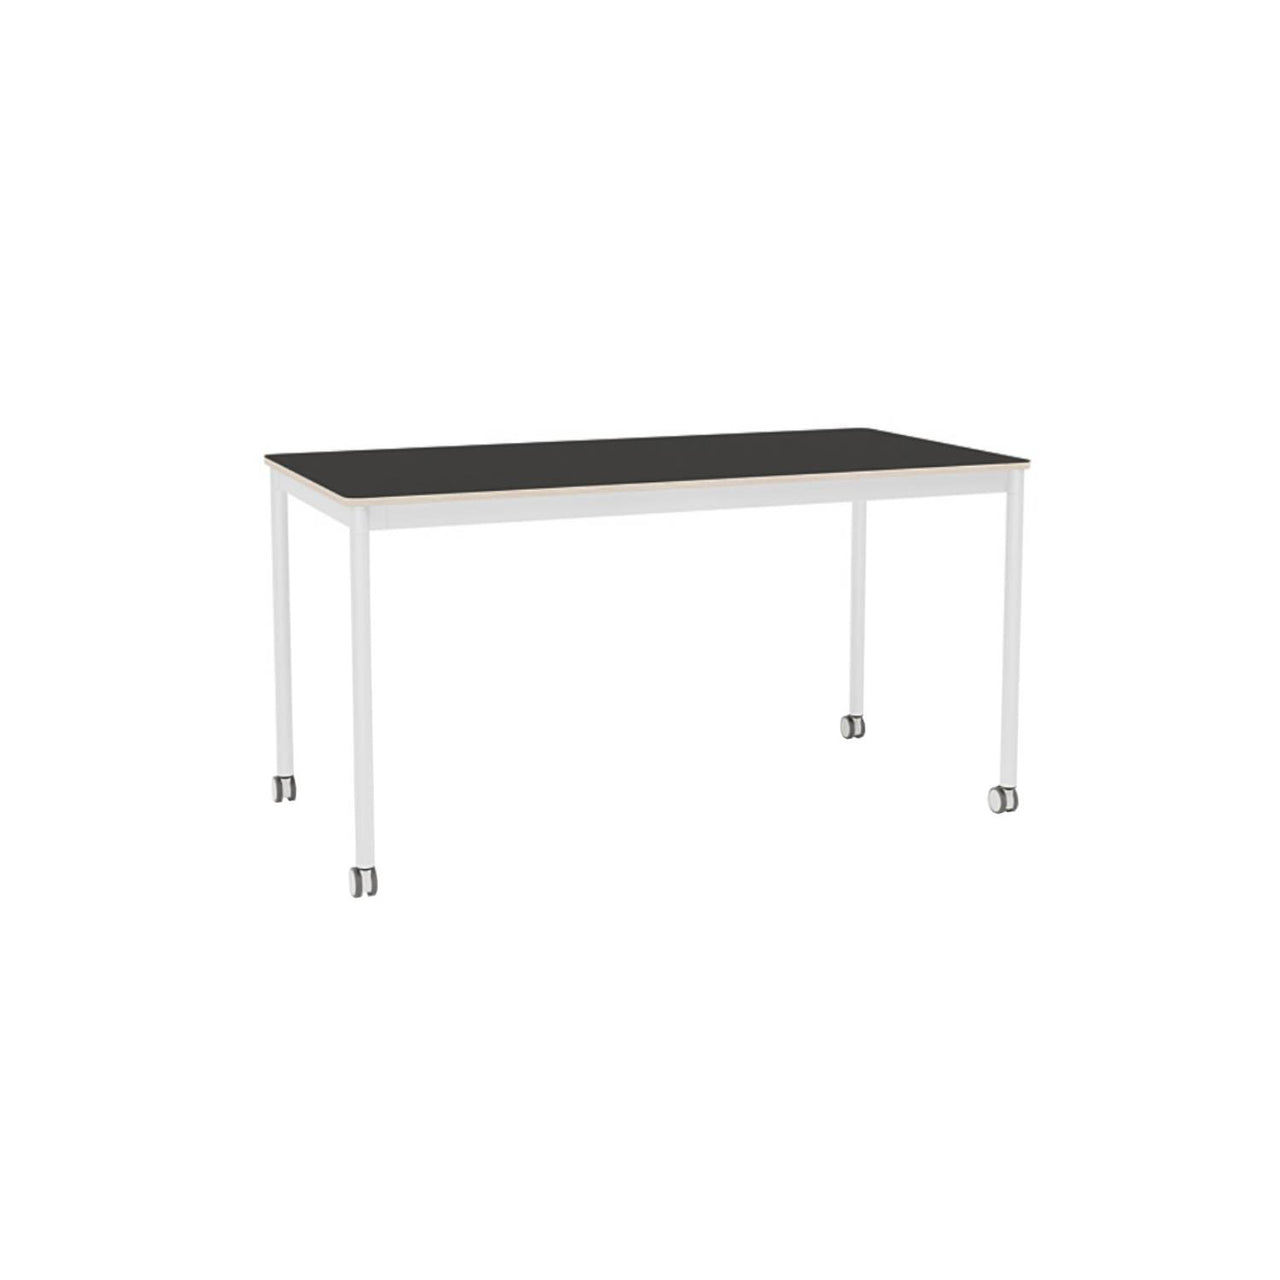 Base Table with Castors: 55.1